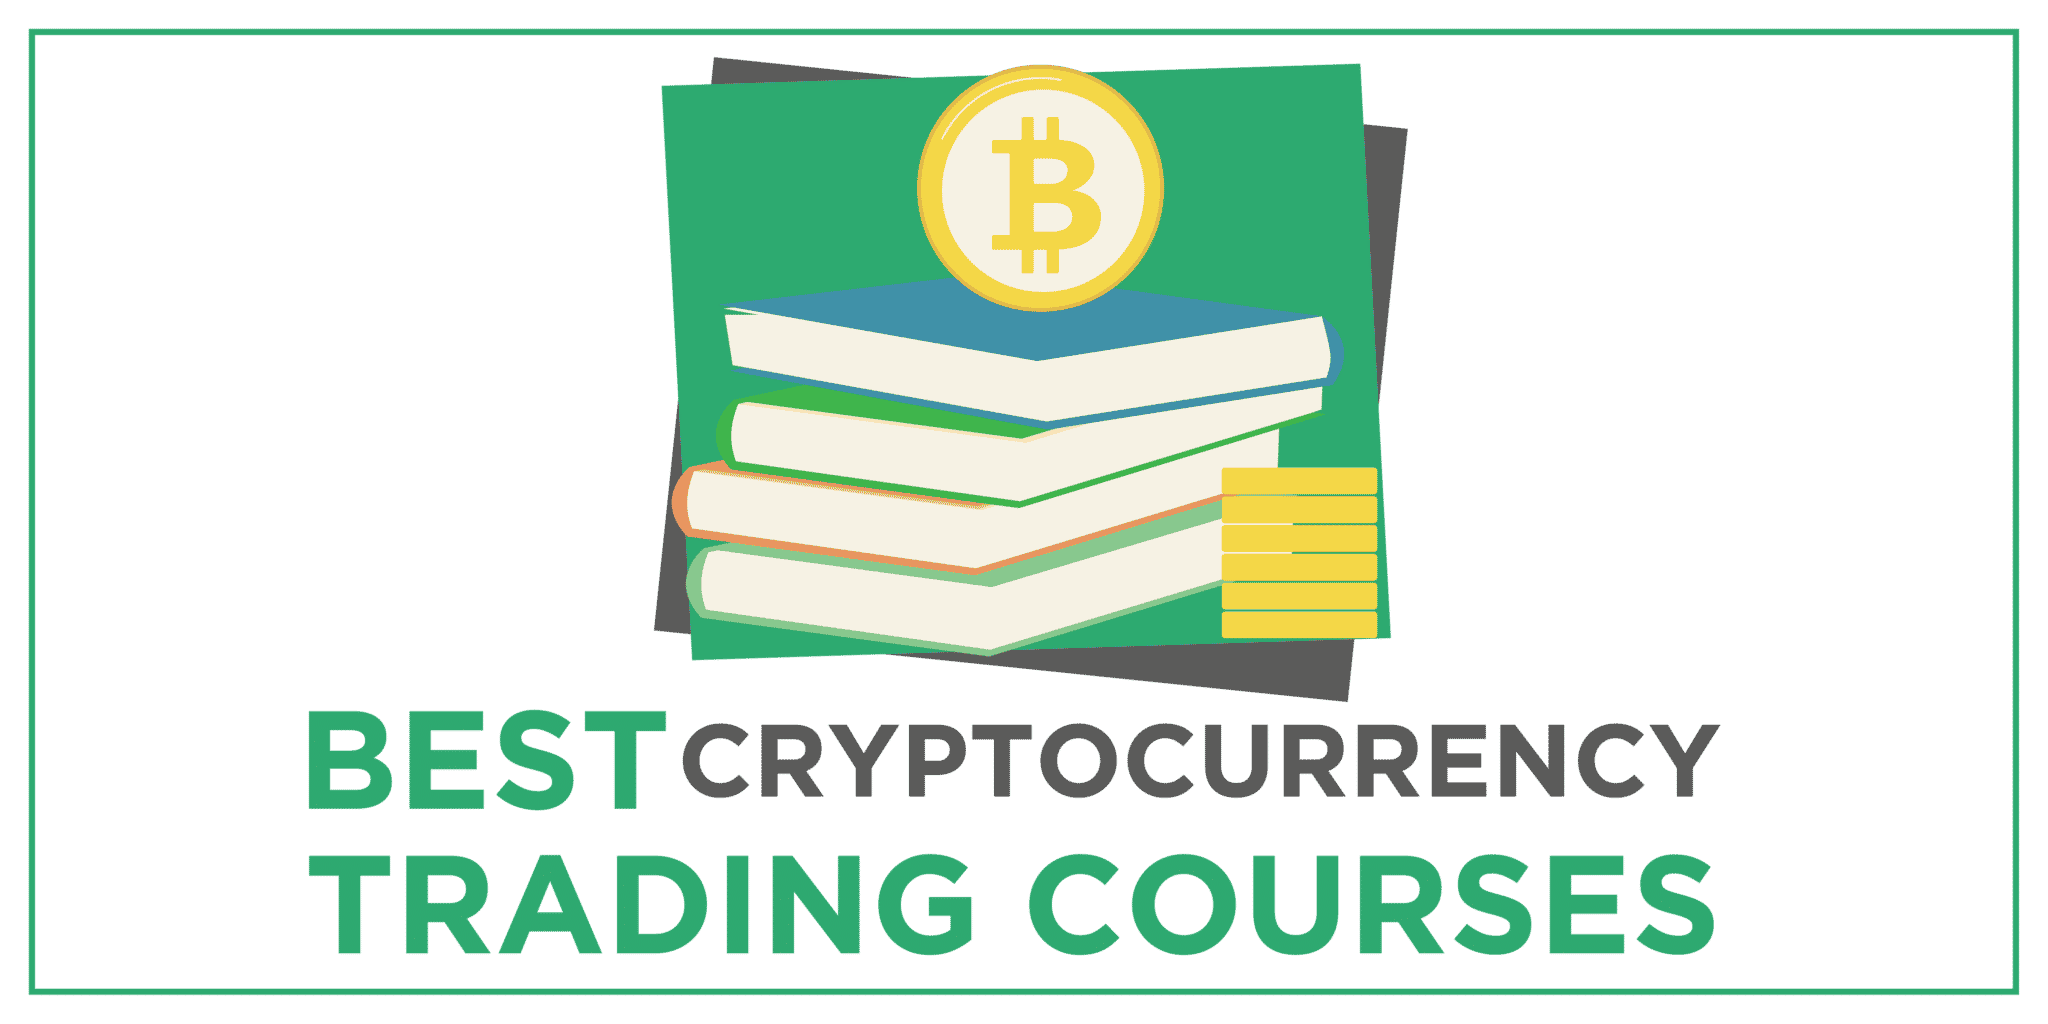 Best Cryptocurrency Trading Courses